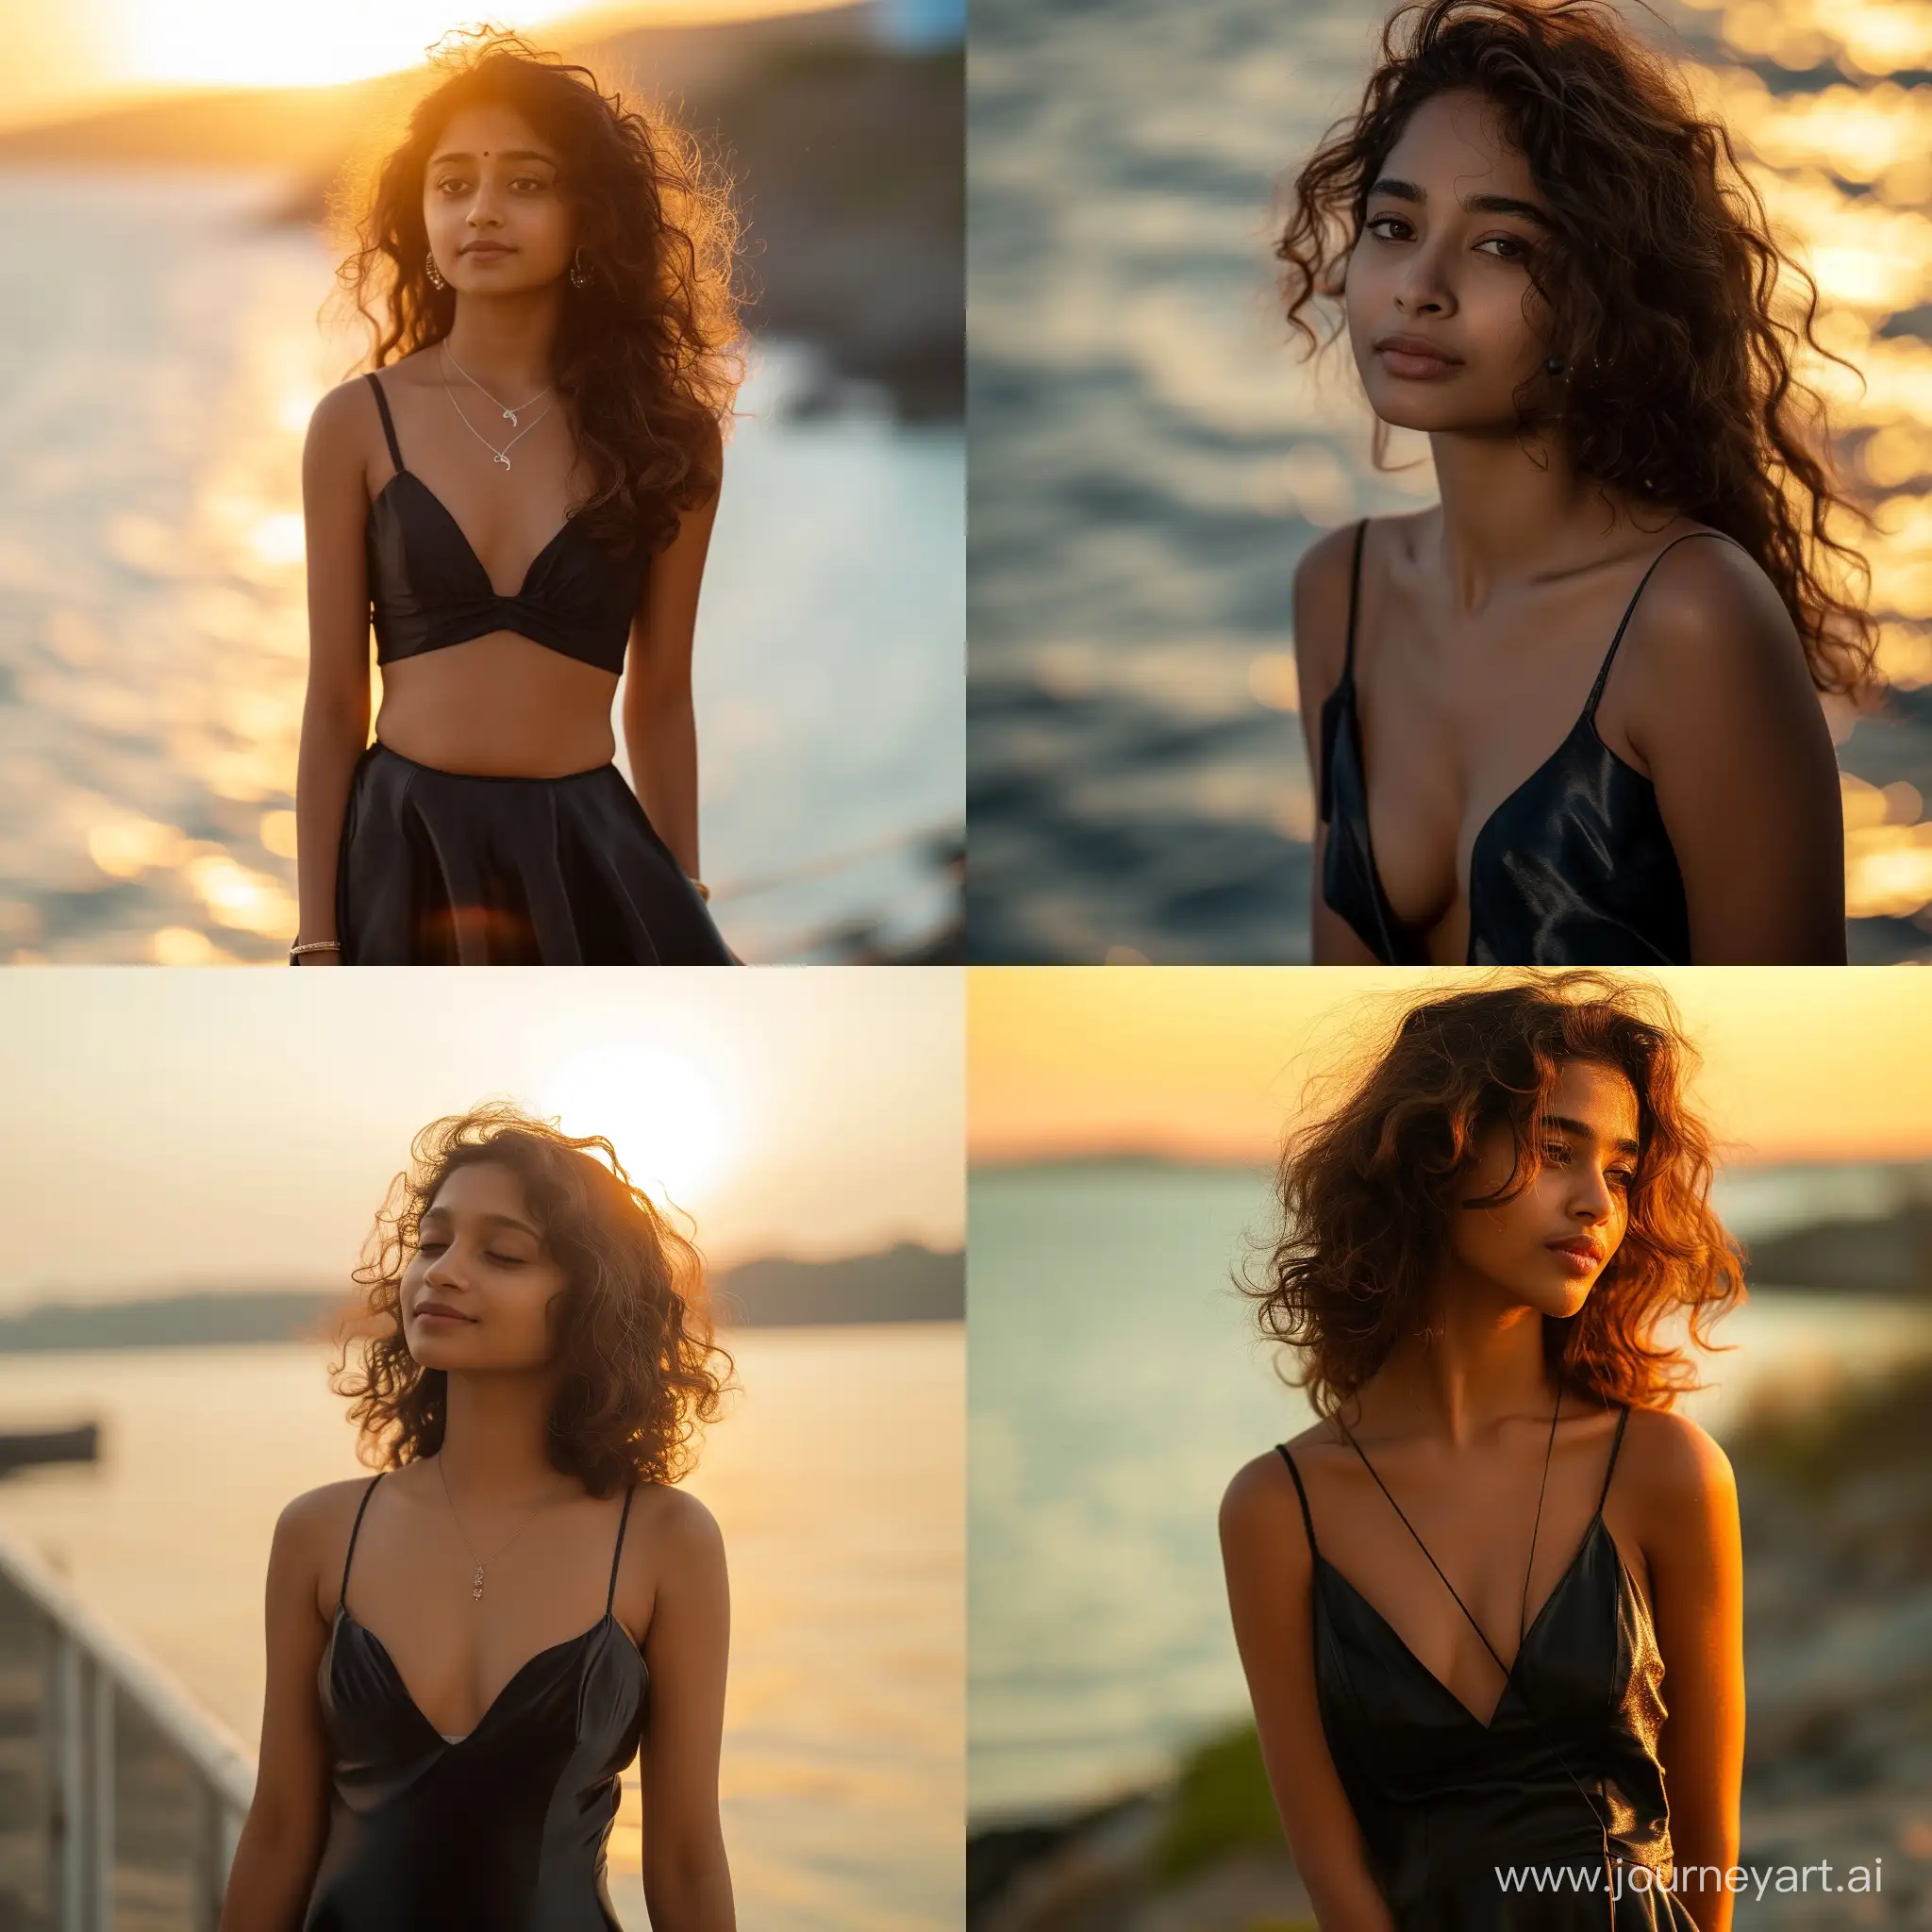 Sunkissed-Indian-Girl-in-Black-Satin-Dress-by-the-Sea-at-Sunset